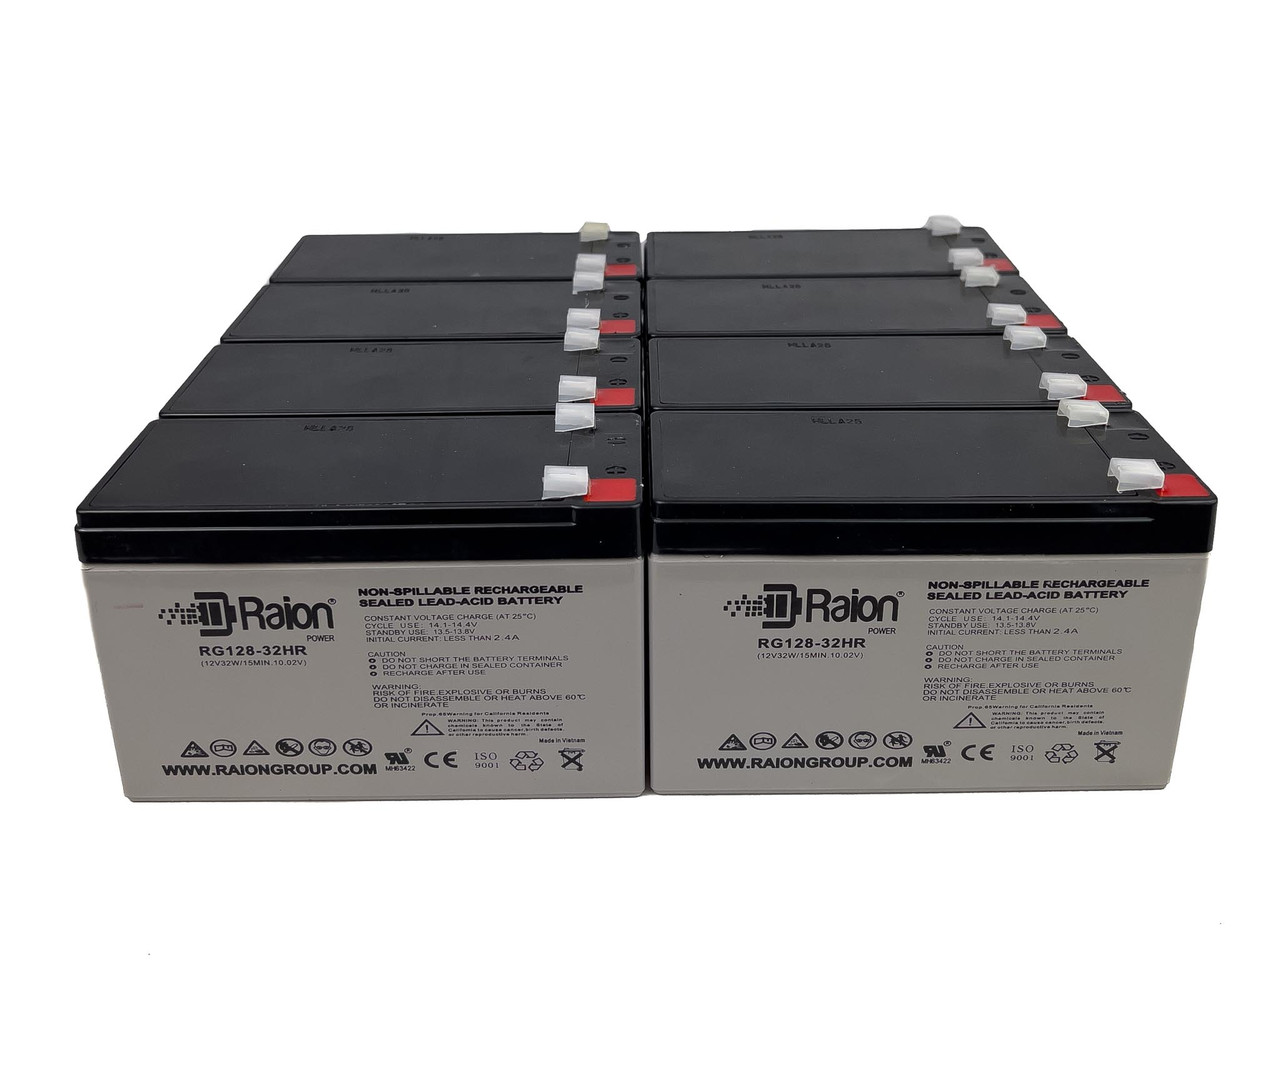 Raion Power 12V 7.5Ah High Rate Discharge UPS Batteries for Toshiba UC1A1A024C6B - 8 Pack